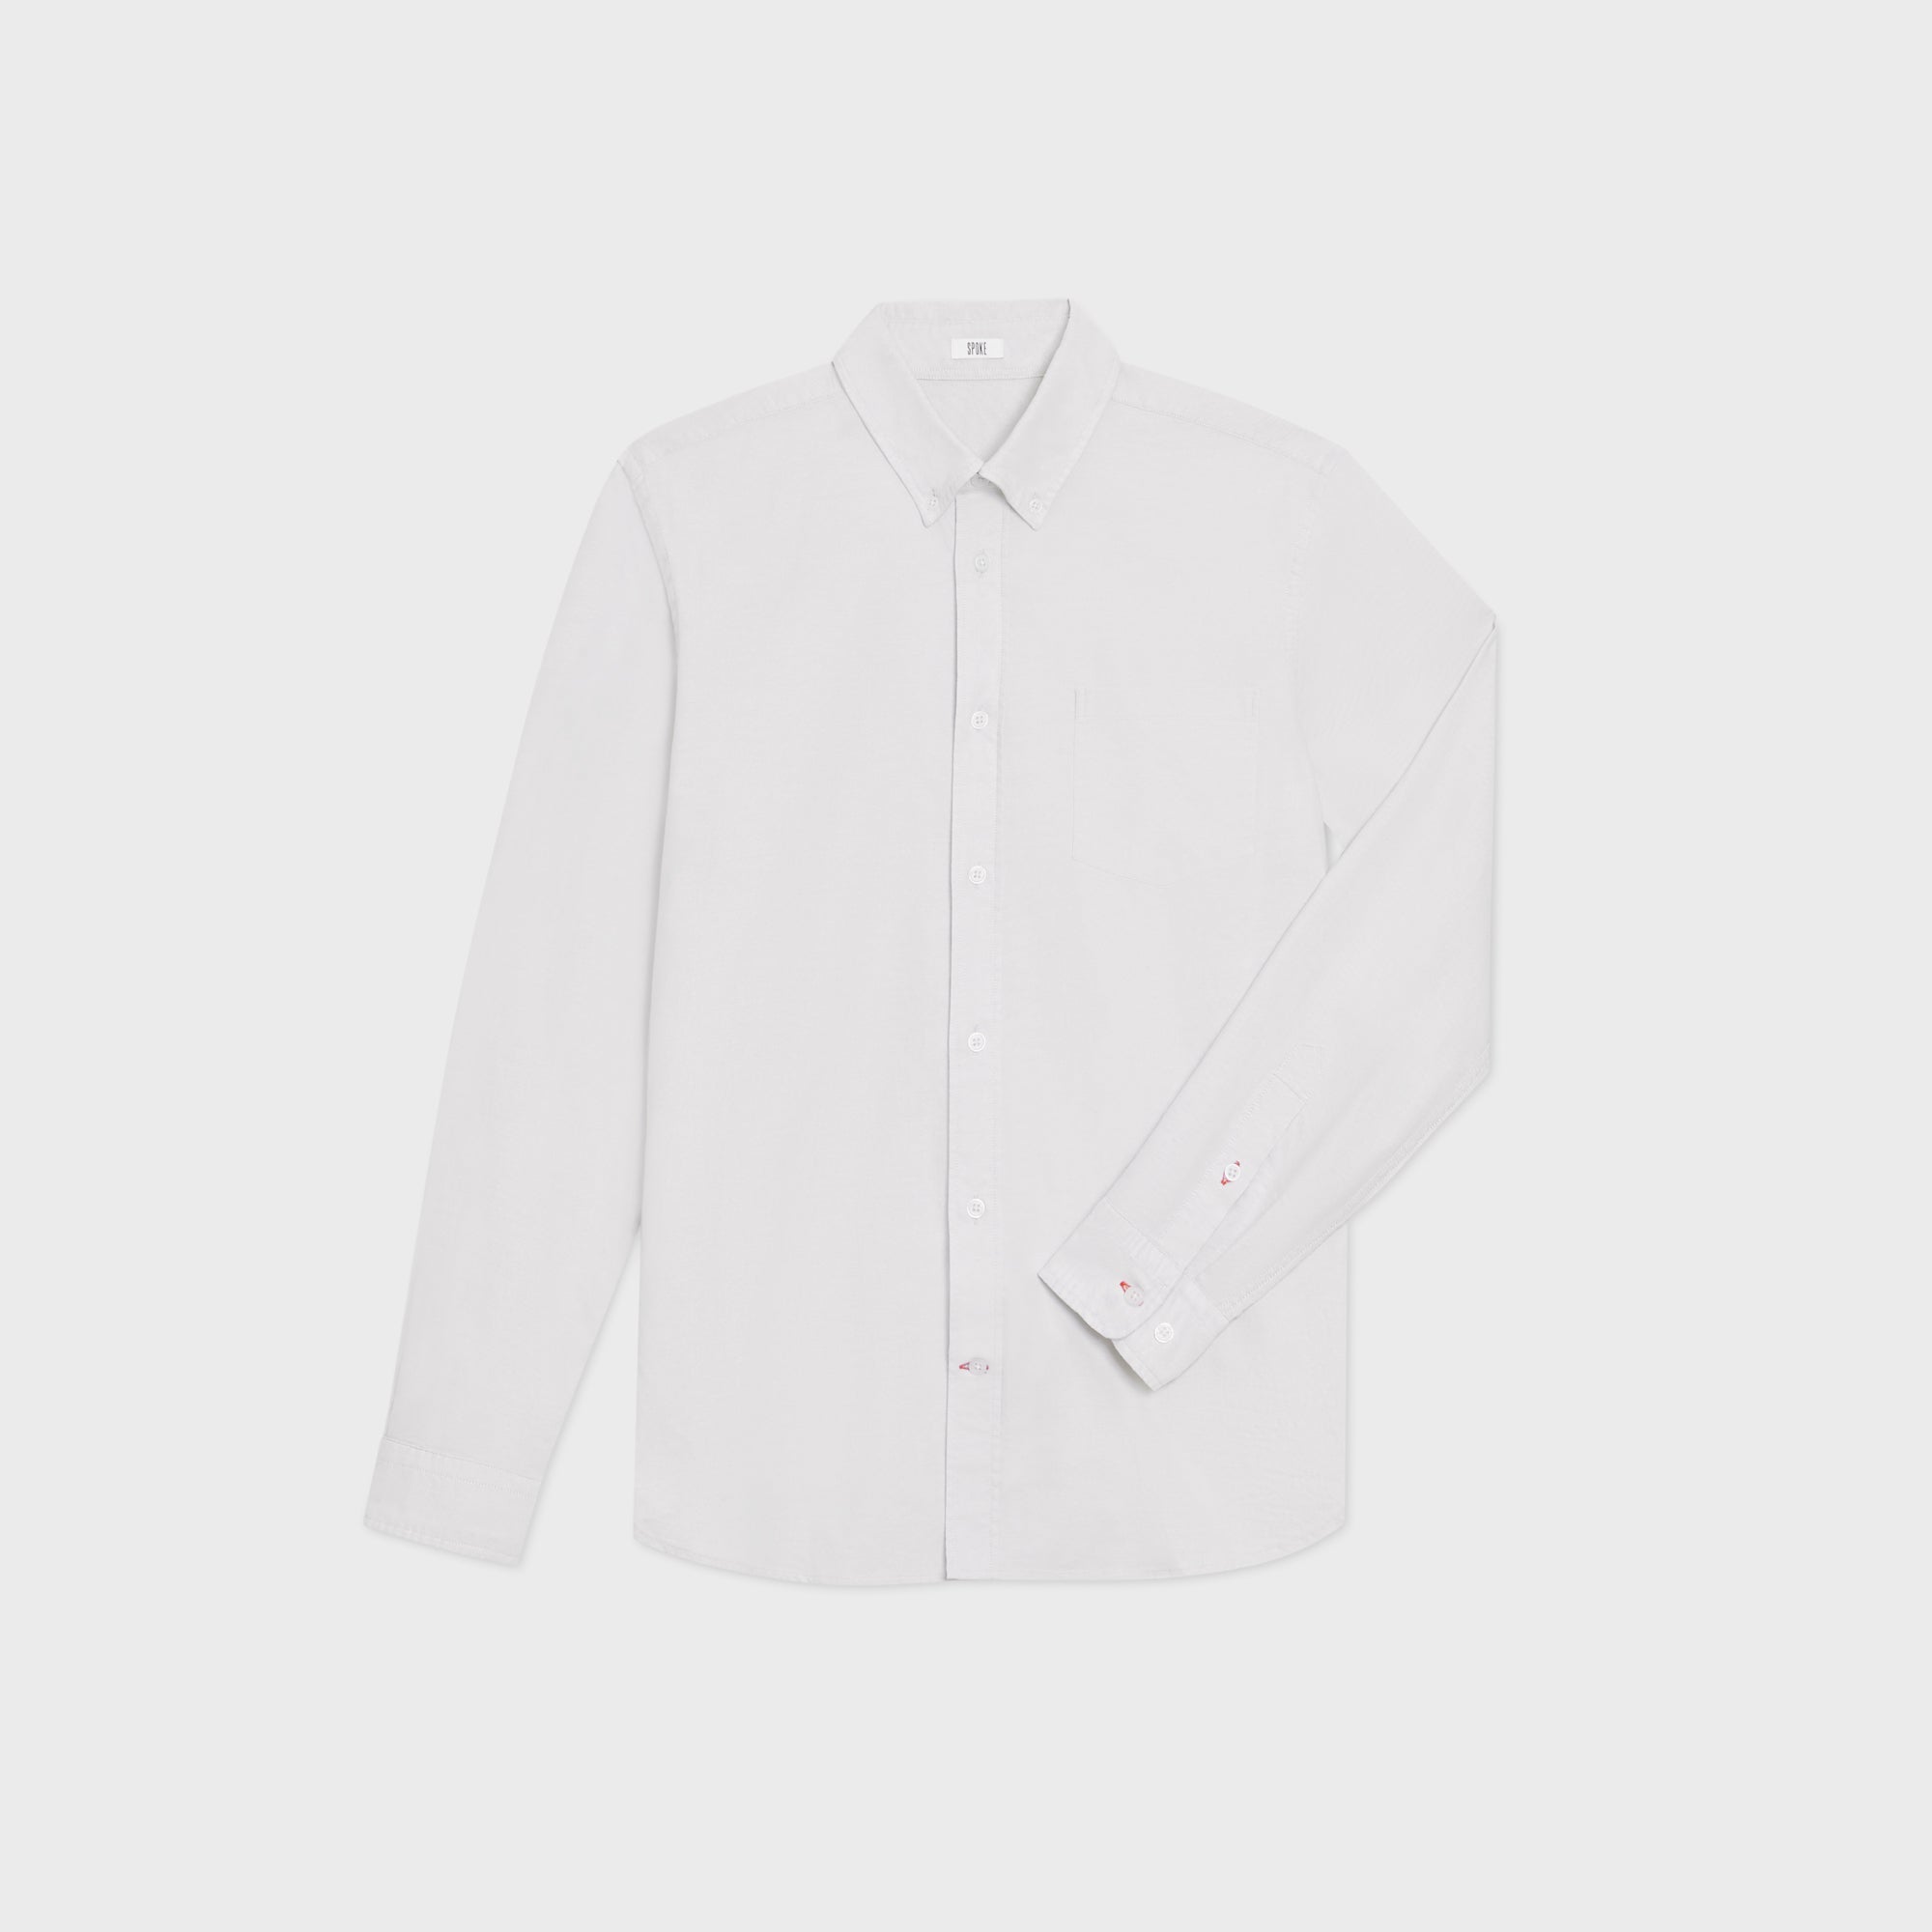 White Oxford Shirts: 16 Crisp Button-ups As Cool as They Are Classic